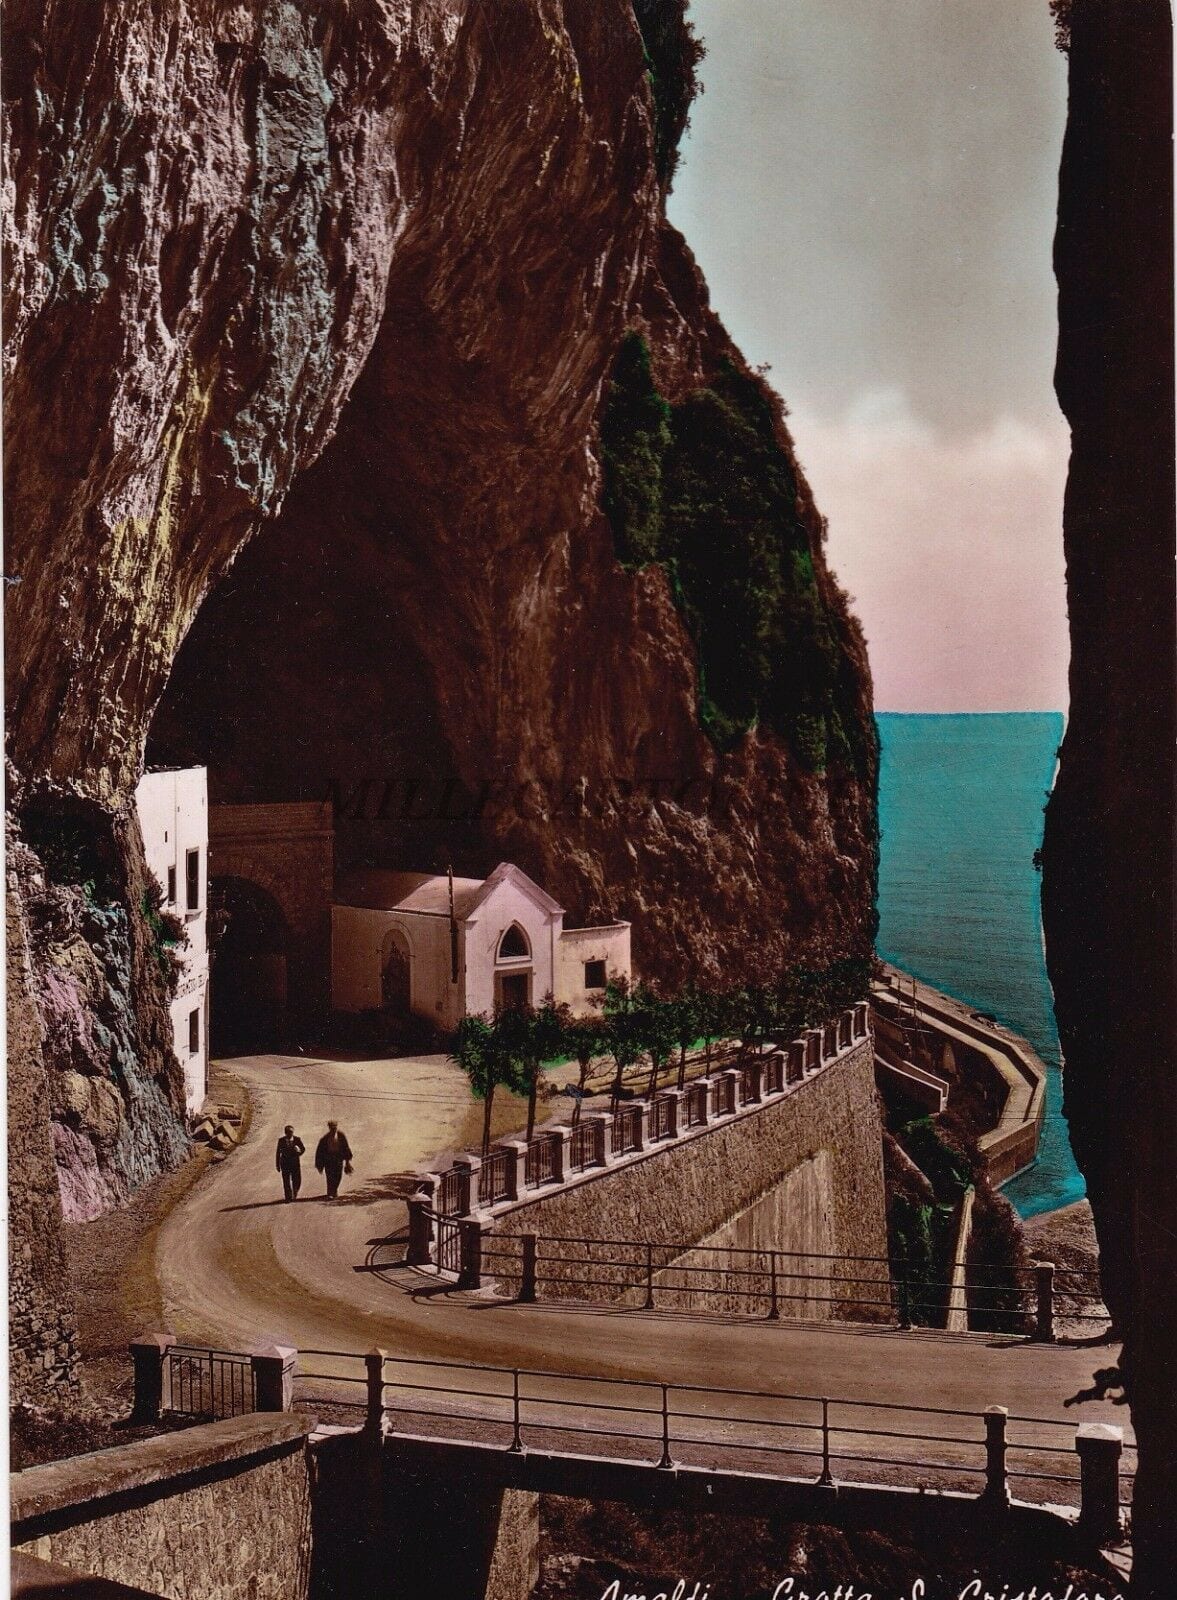 The grotto of St. Christopher at the entrance to Amalfi. Named after the Chapel of the same name. The Chapel has a gable facade with a triangular window on the entrance door and on the left wall a fresco depicting Christopher with the Baby Jesus in his arms.